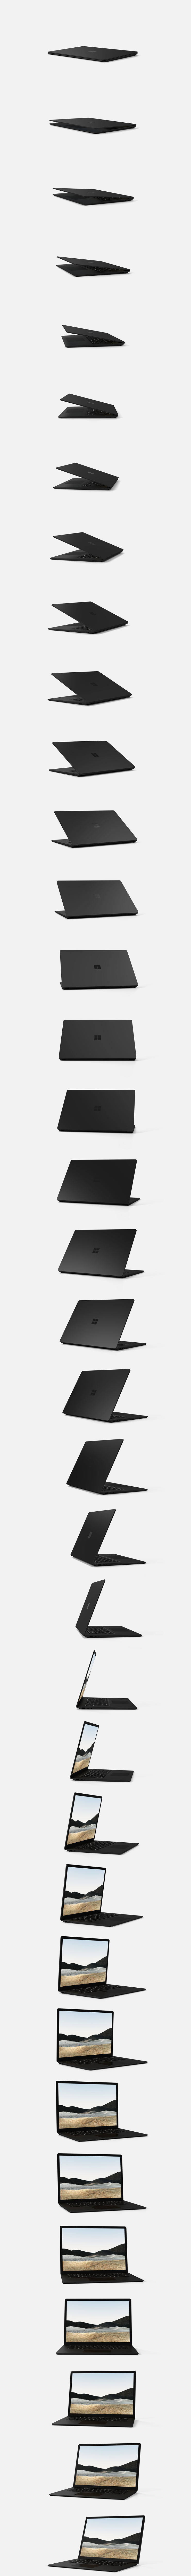 Surface Laptop 4 for Business.